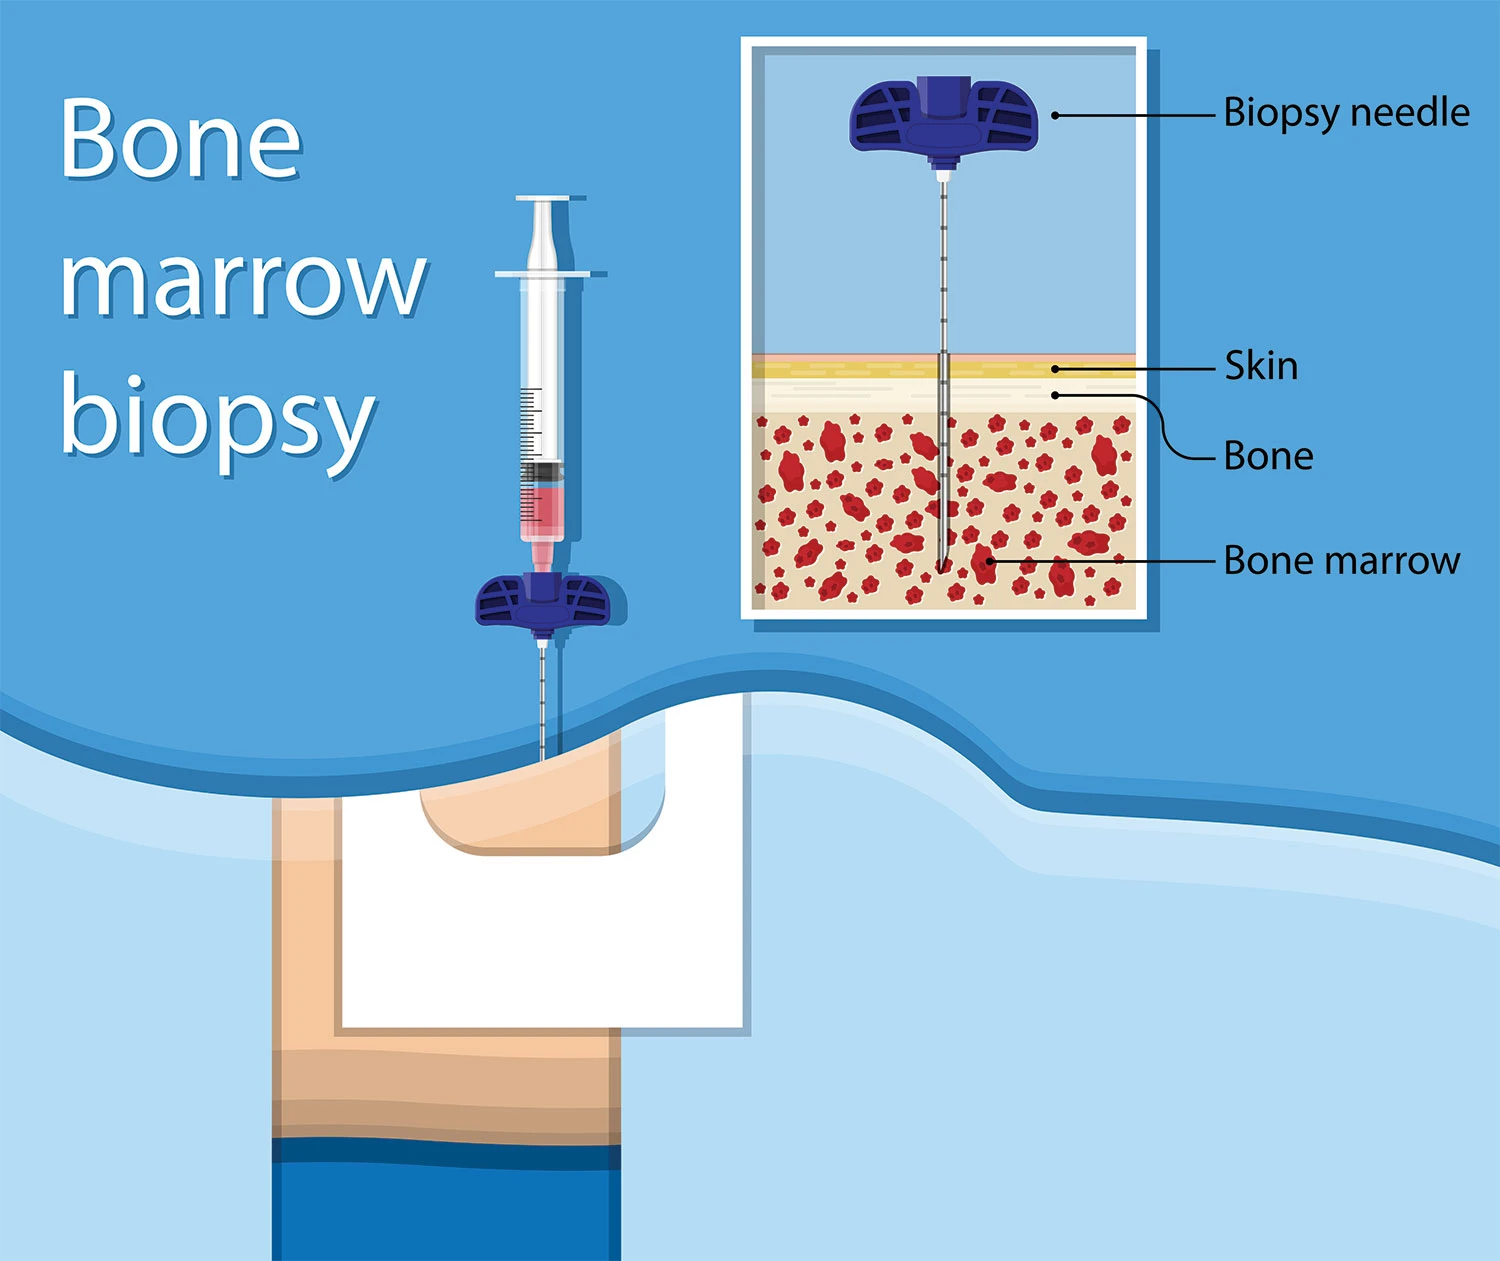 image showing how the bone marrow biopsy is done